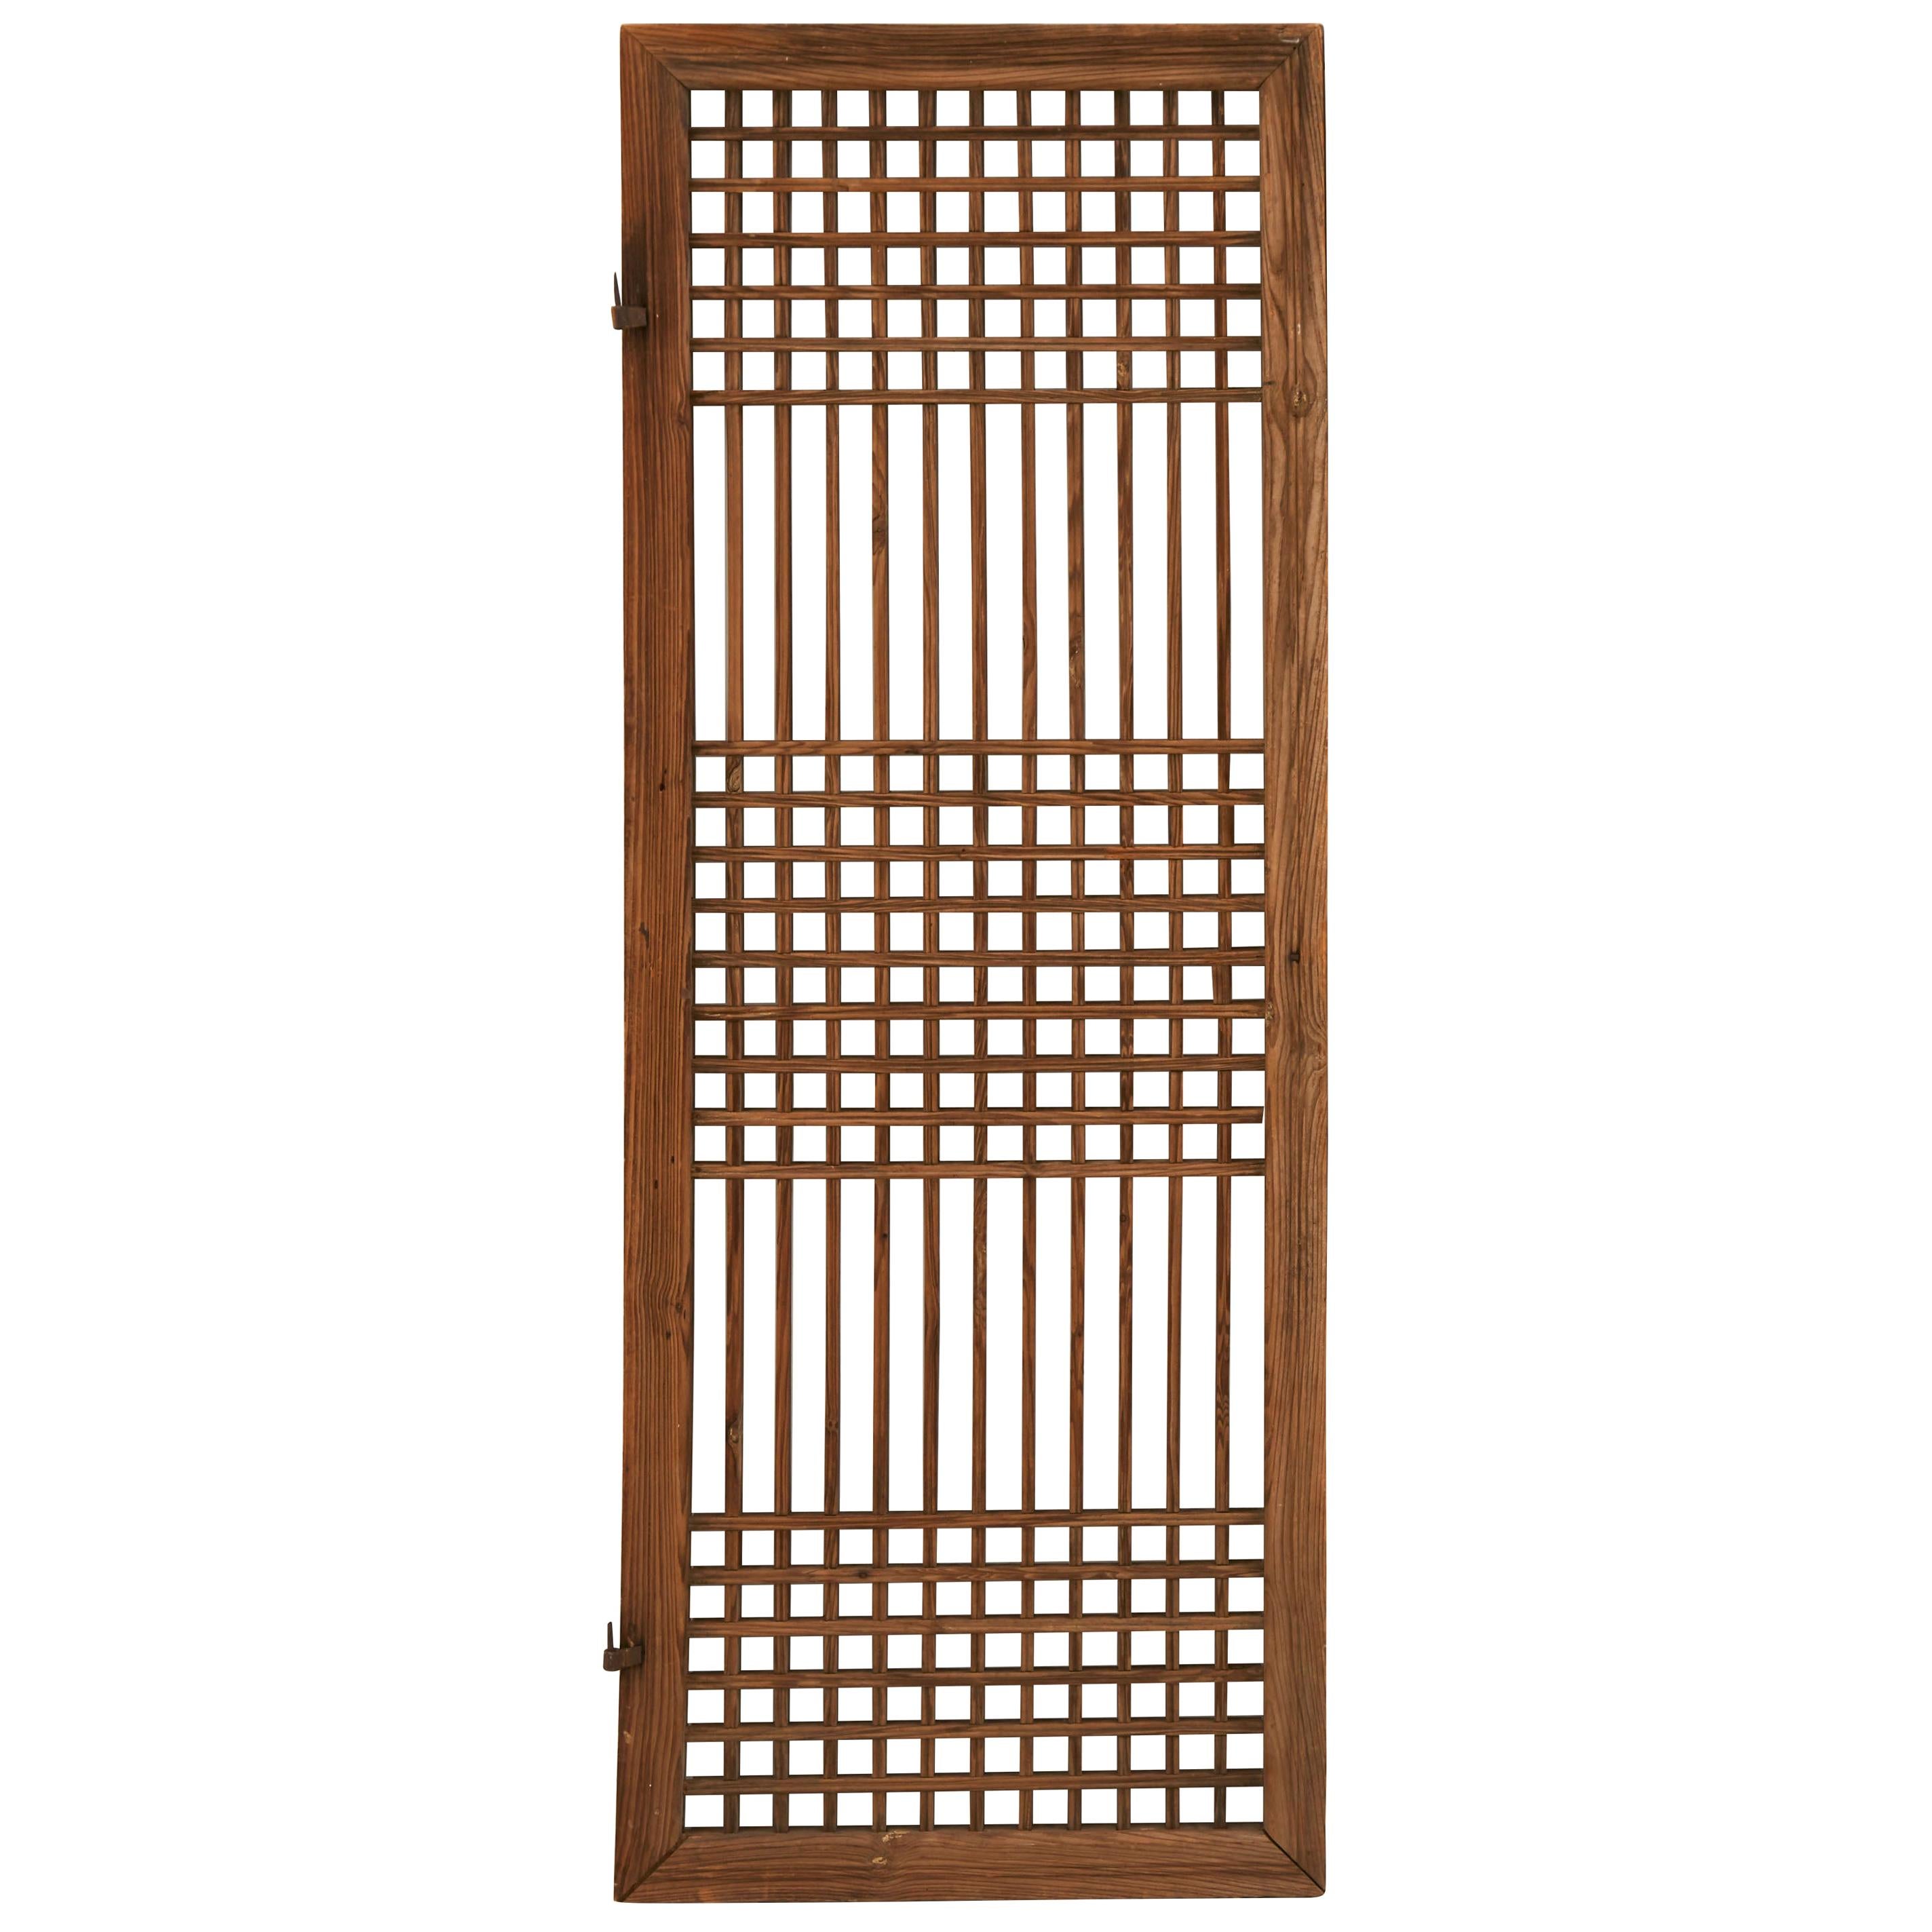 Early 20th Century Chinese Wooden Screen Door